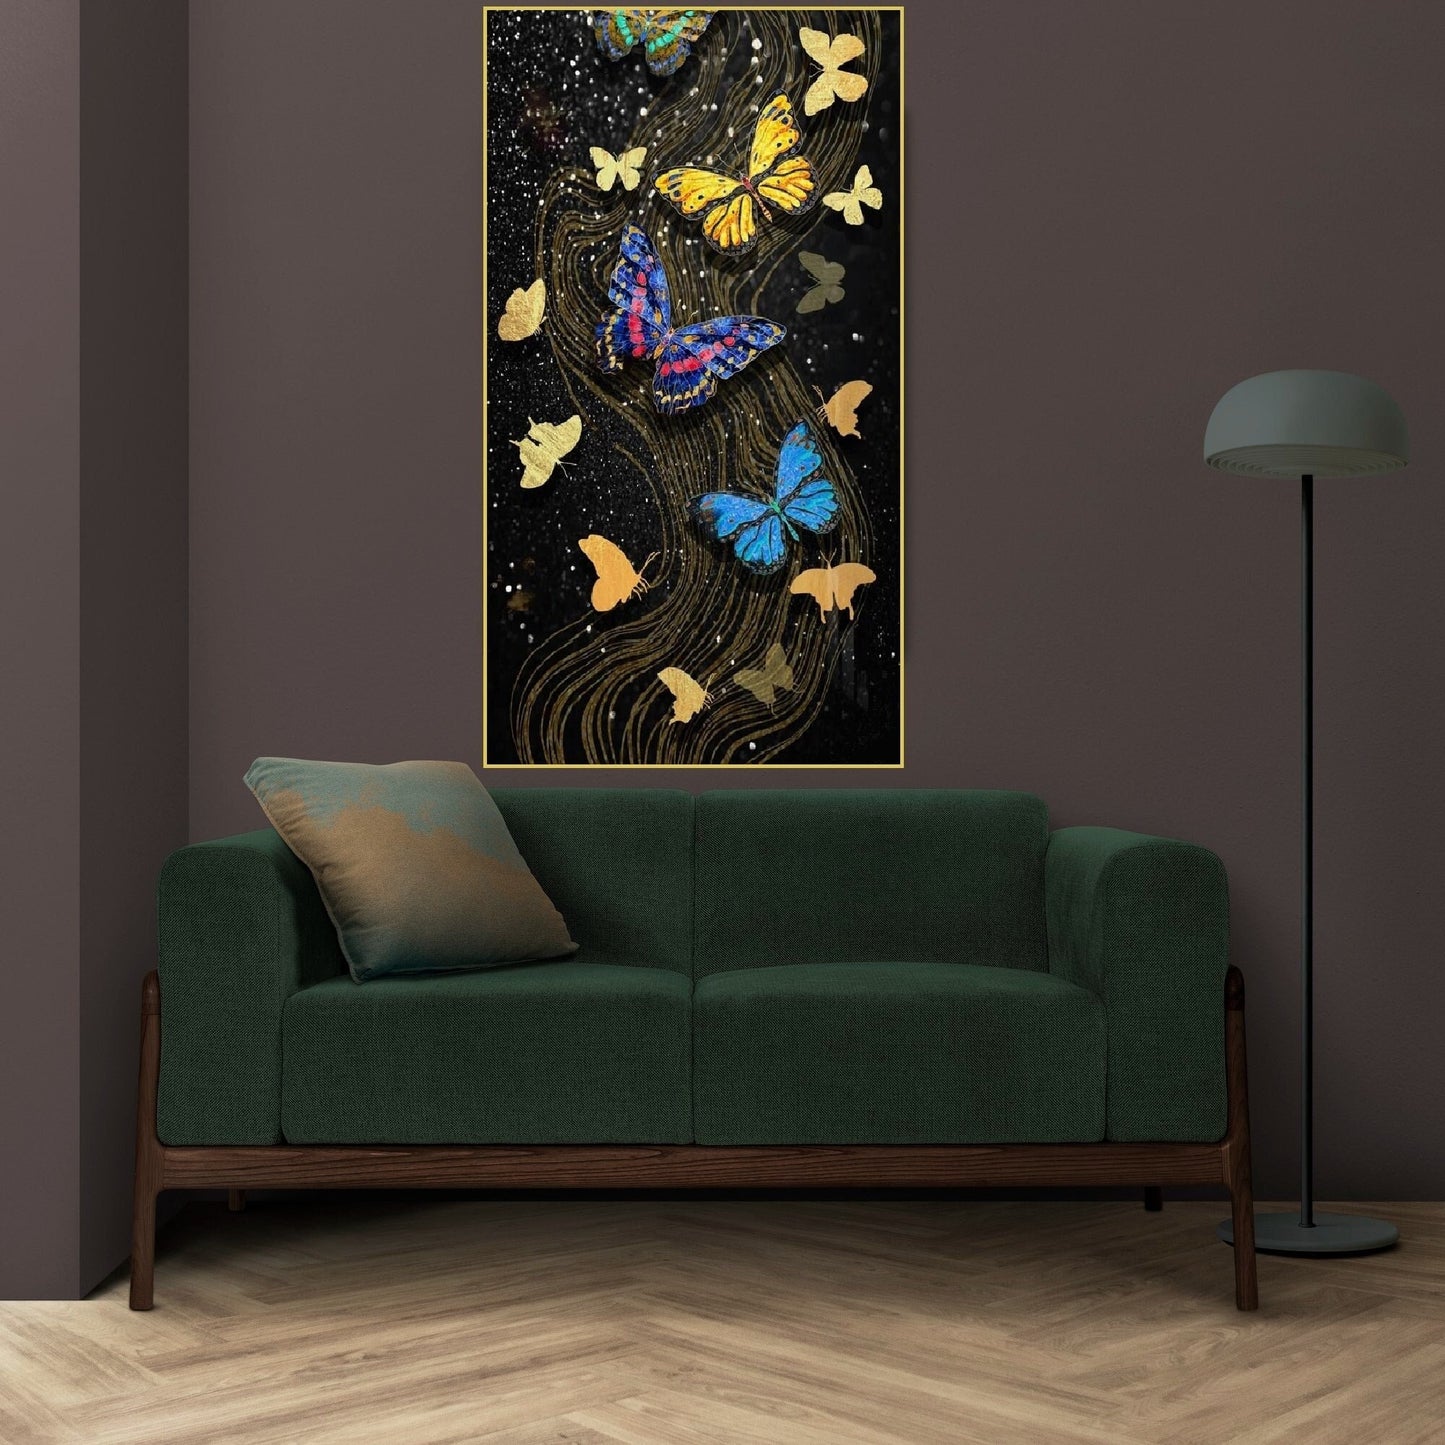 Large butterfly wall art, floater frame canvas print, dark printable hanging wall decor, colorful framed canvas artwork for living room